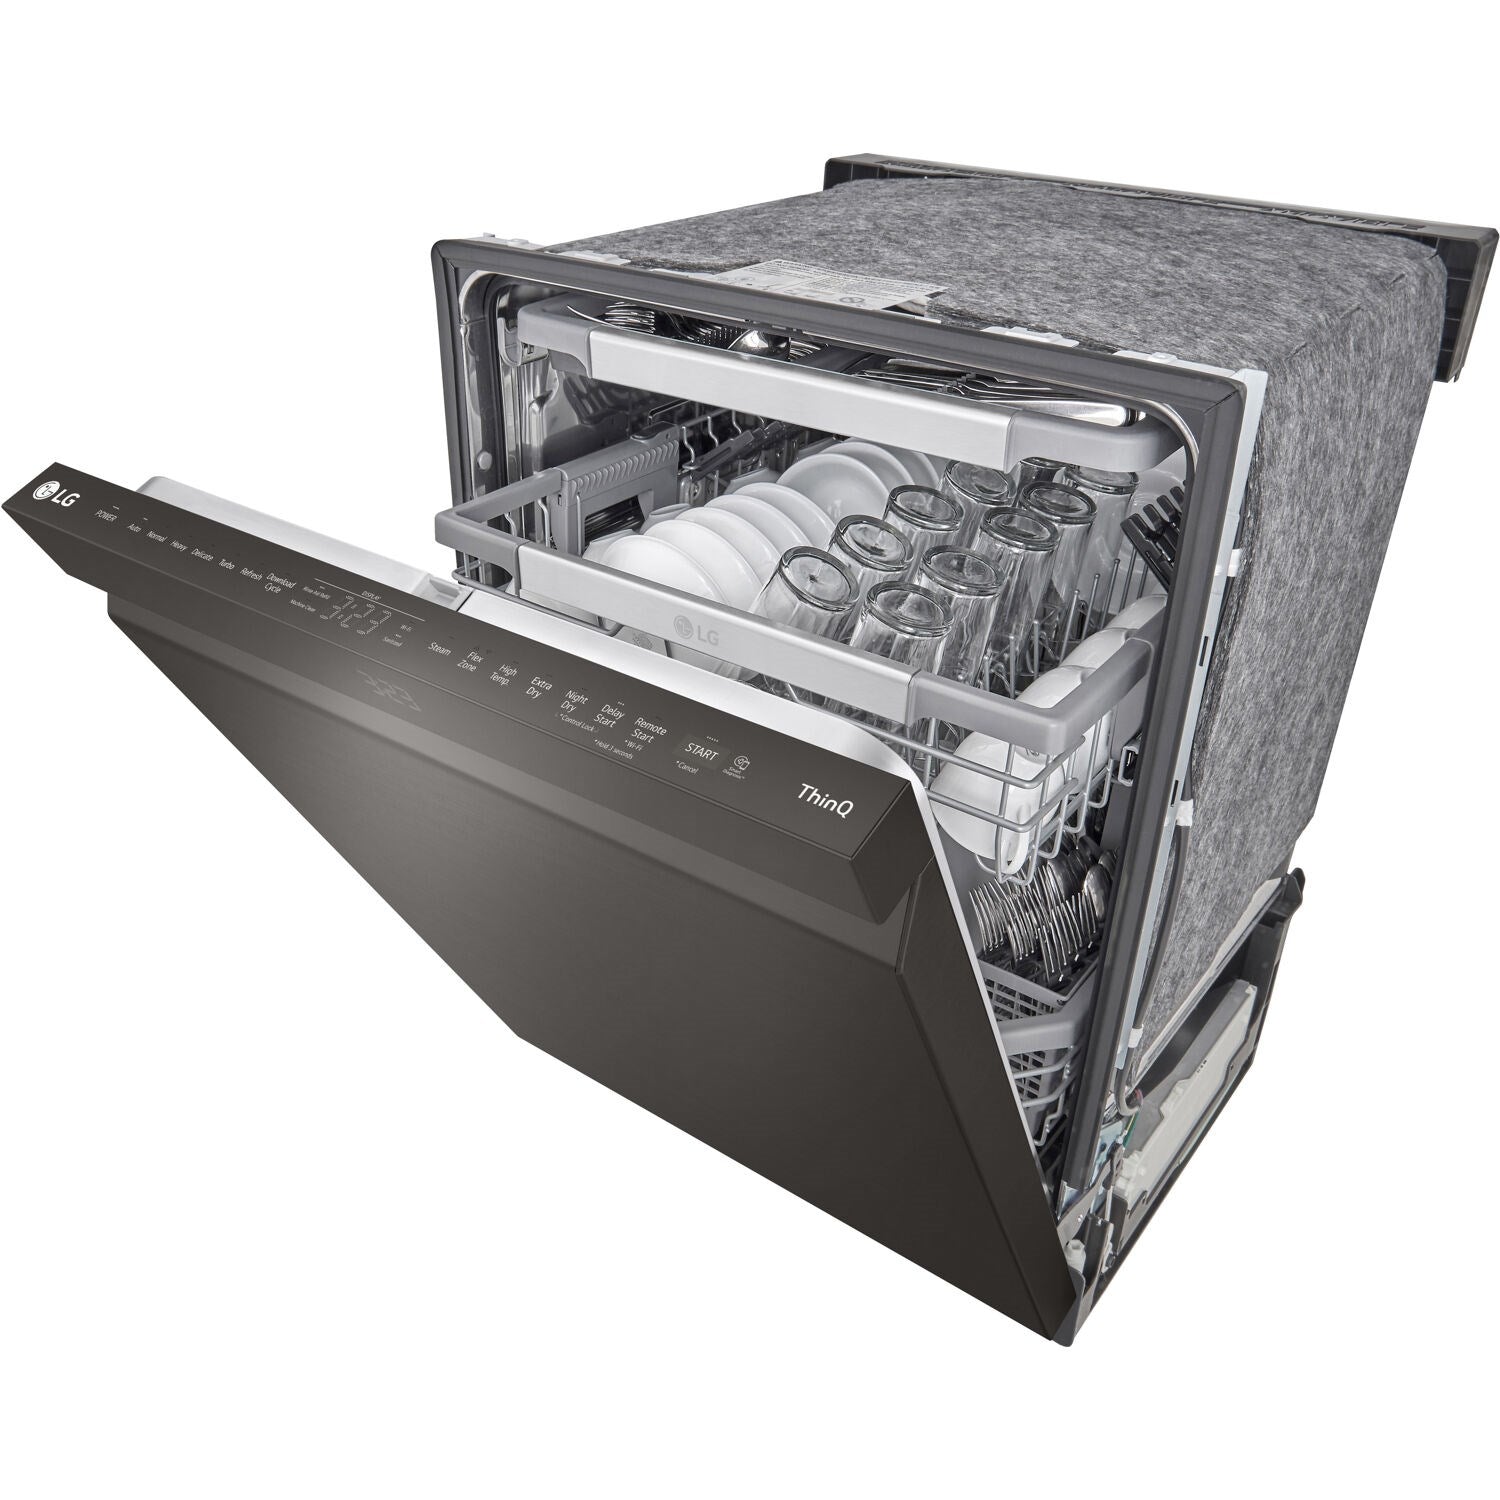 LG Fully Integrated Built In Dishwashers LDPS6762D